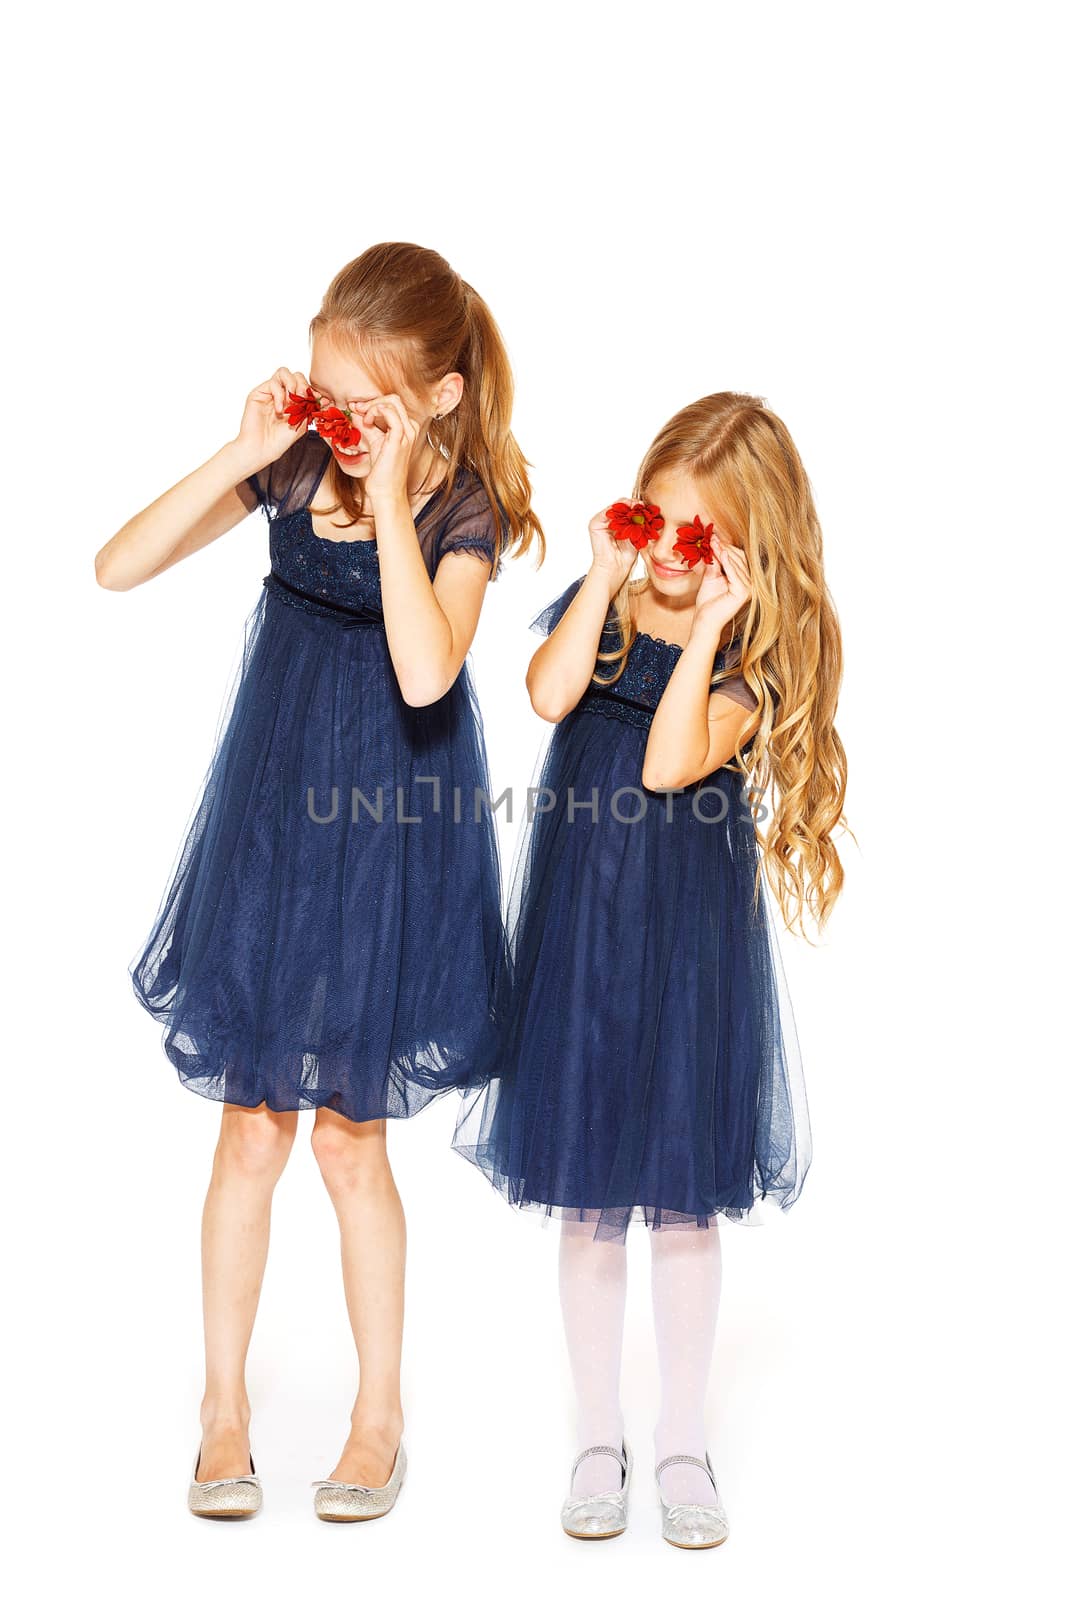 Little cute girls holding two red flowers near their eyes